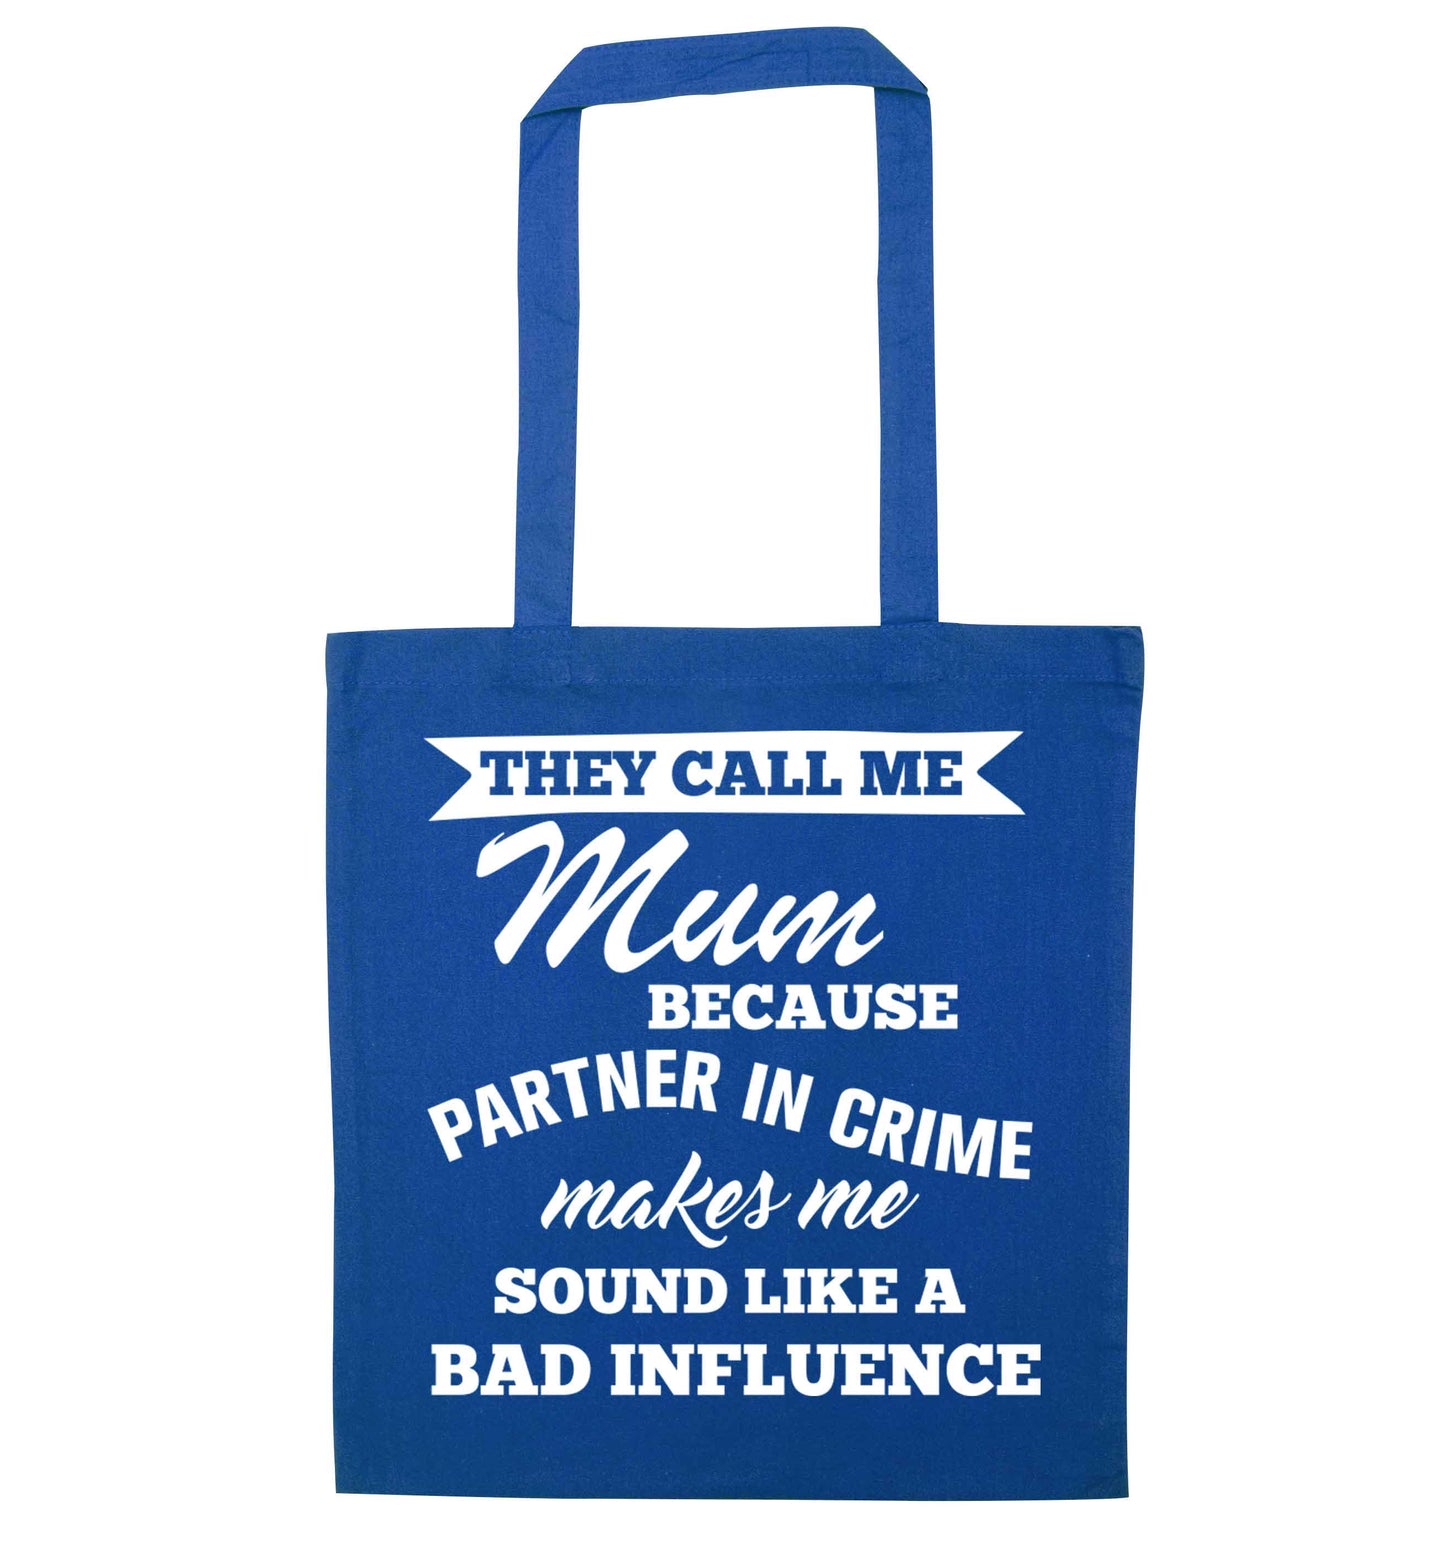 They call me mum because partner in crime makes me sound like a bad influence blue tote bag